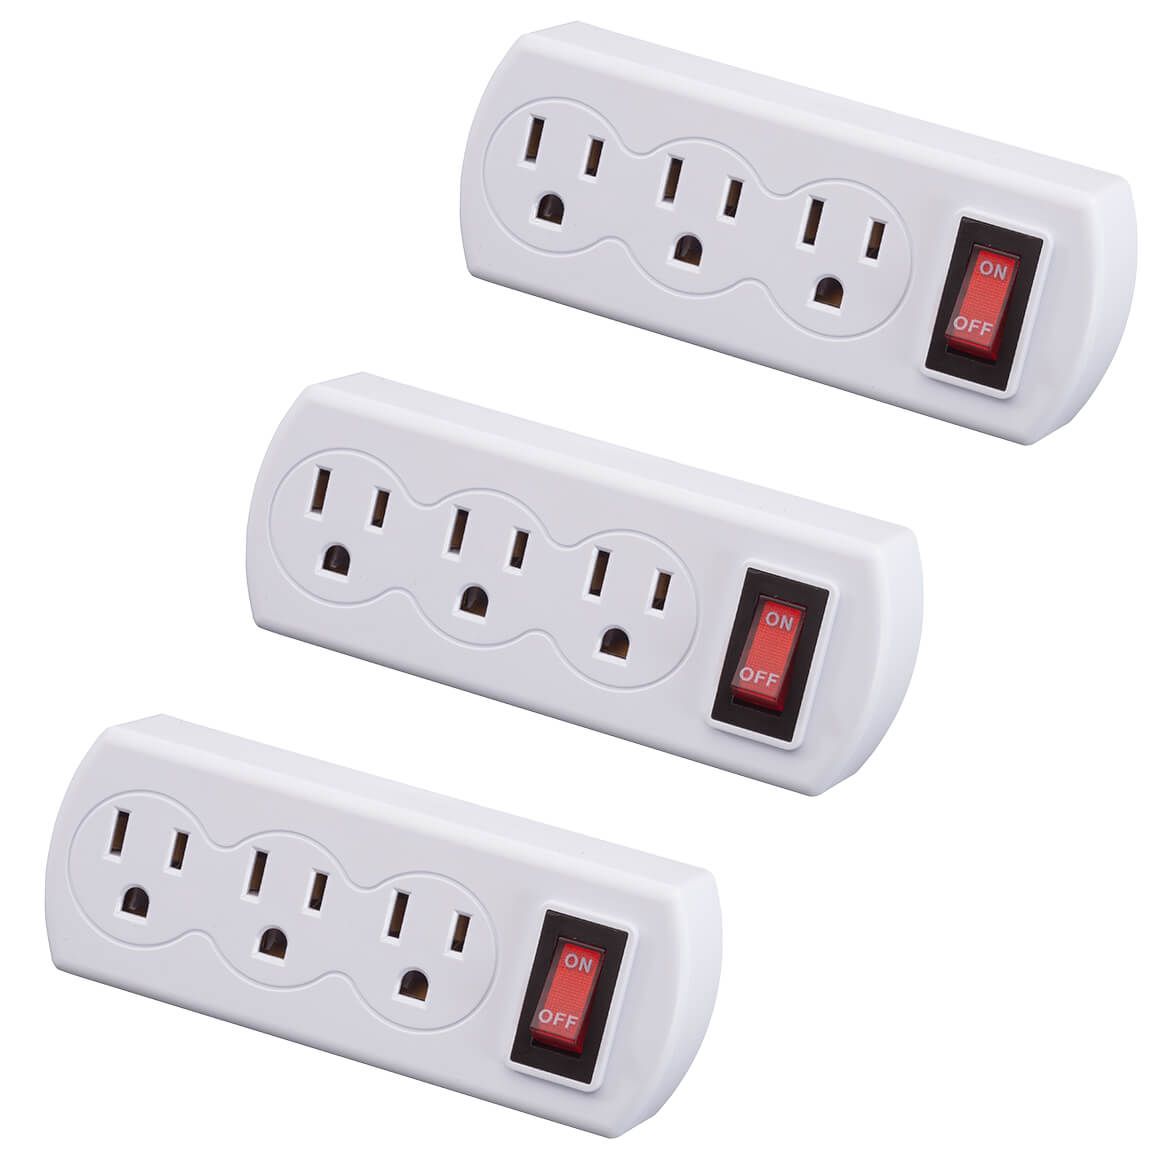 Triple Plug Adapter with Switch 3-Pack + '-' + 365434